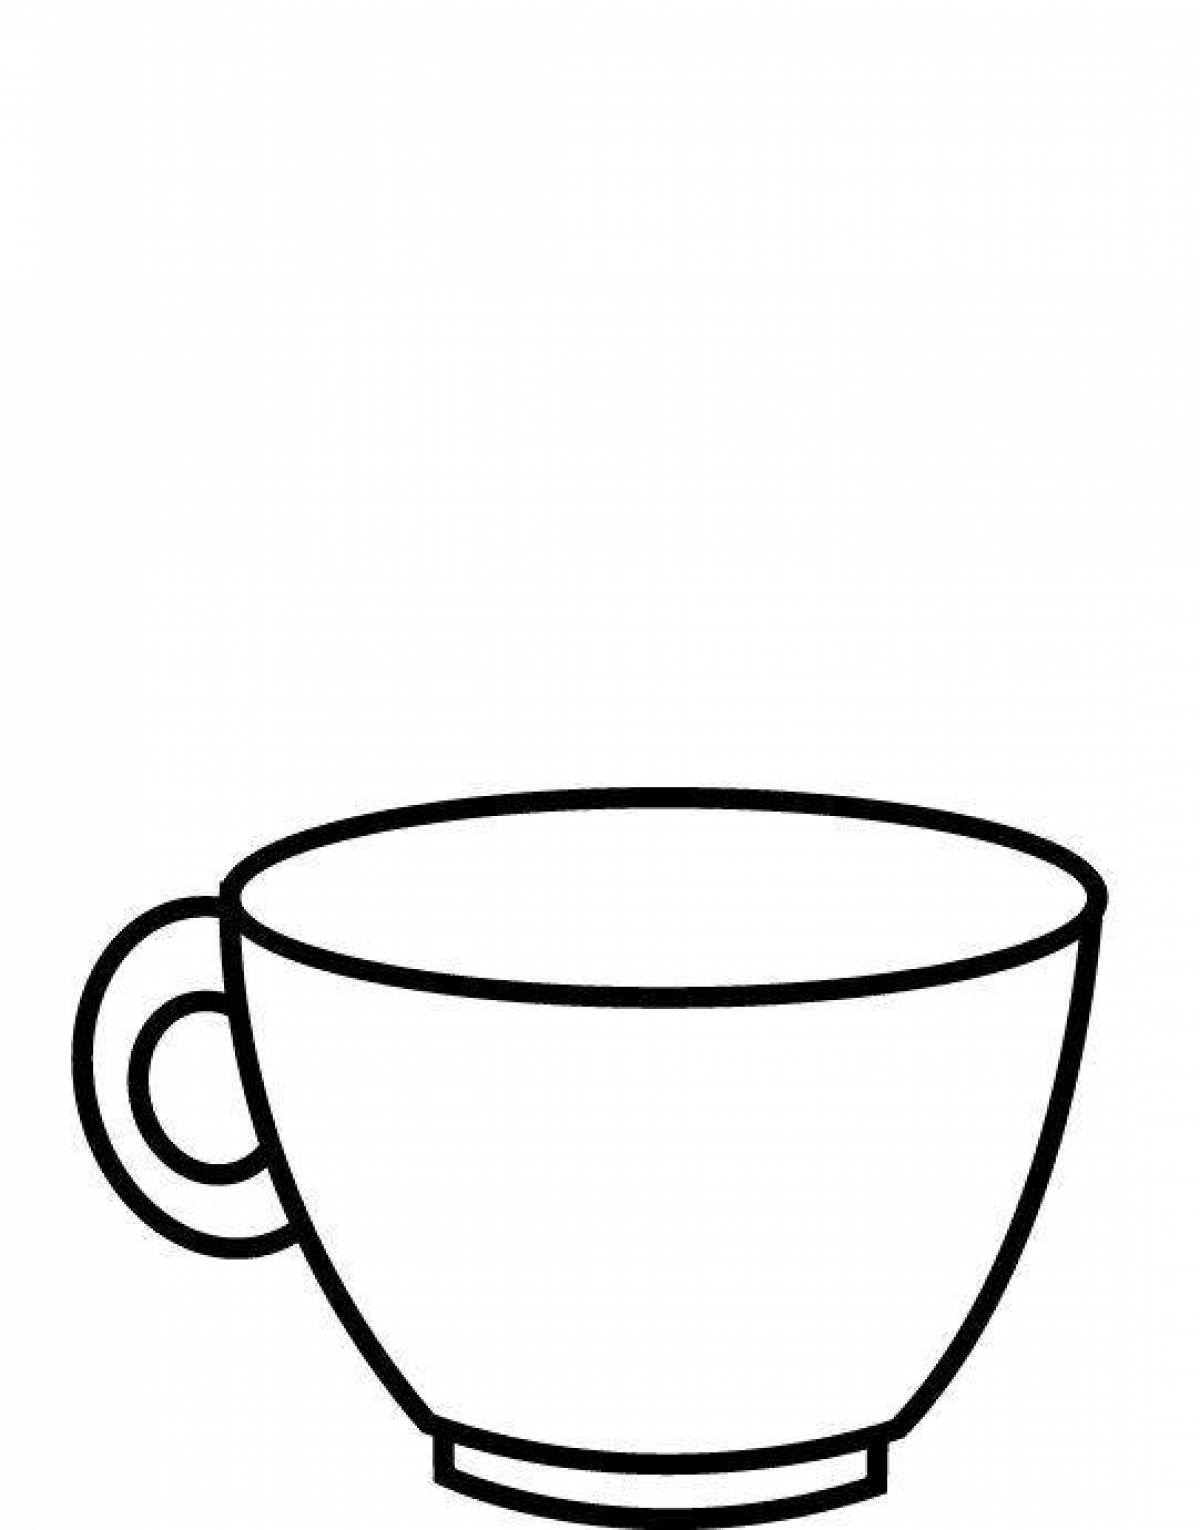 Cup picture for kids #7